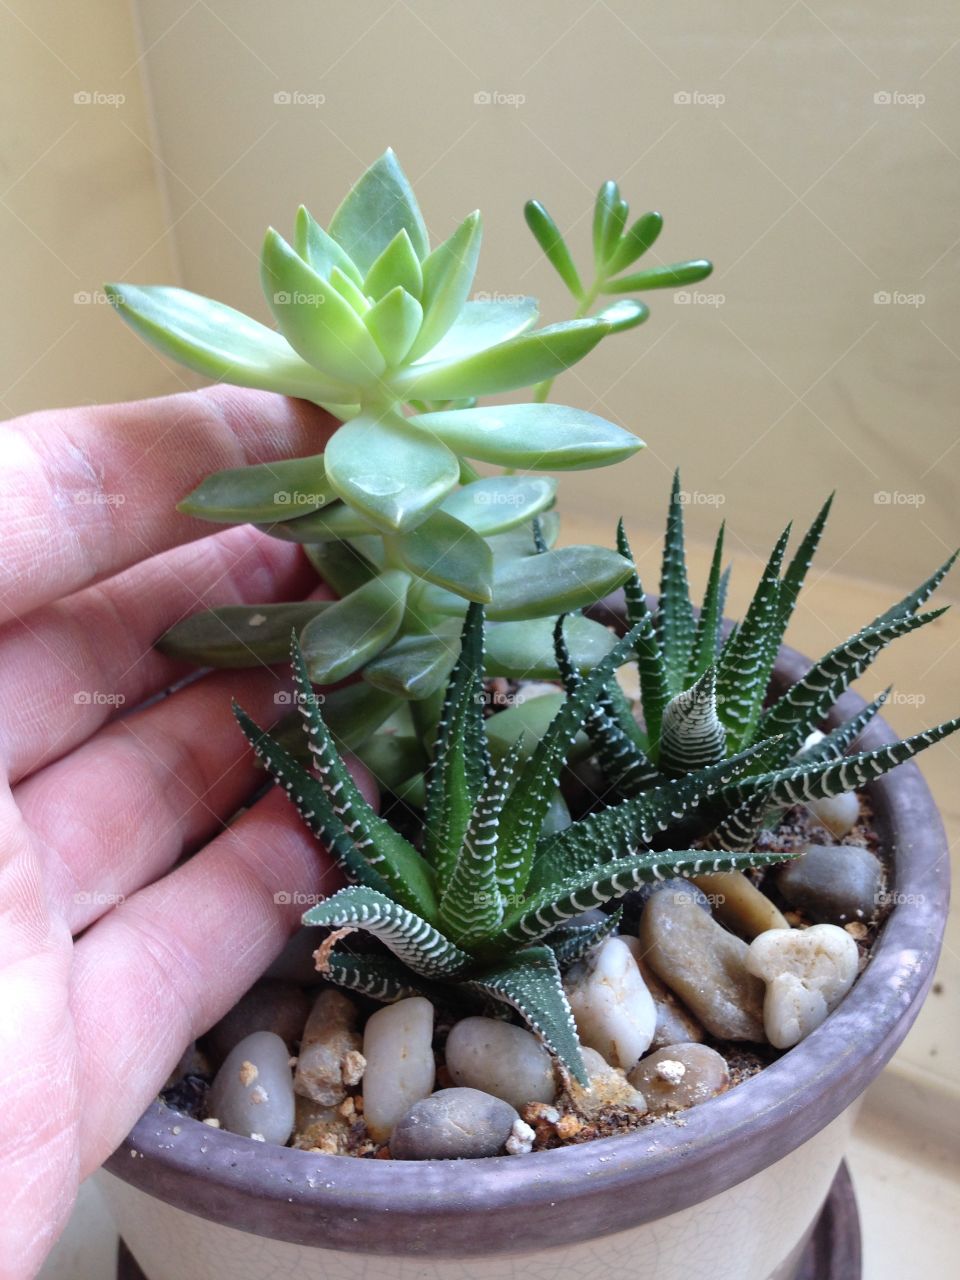 A variety of succulents in a planter.